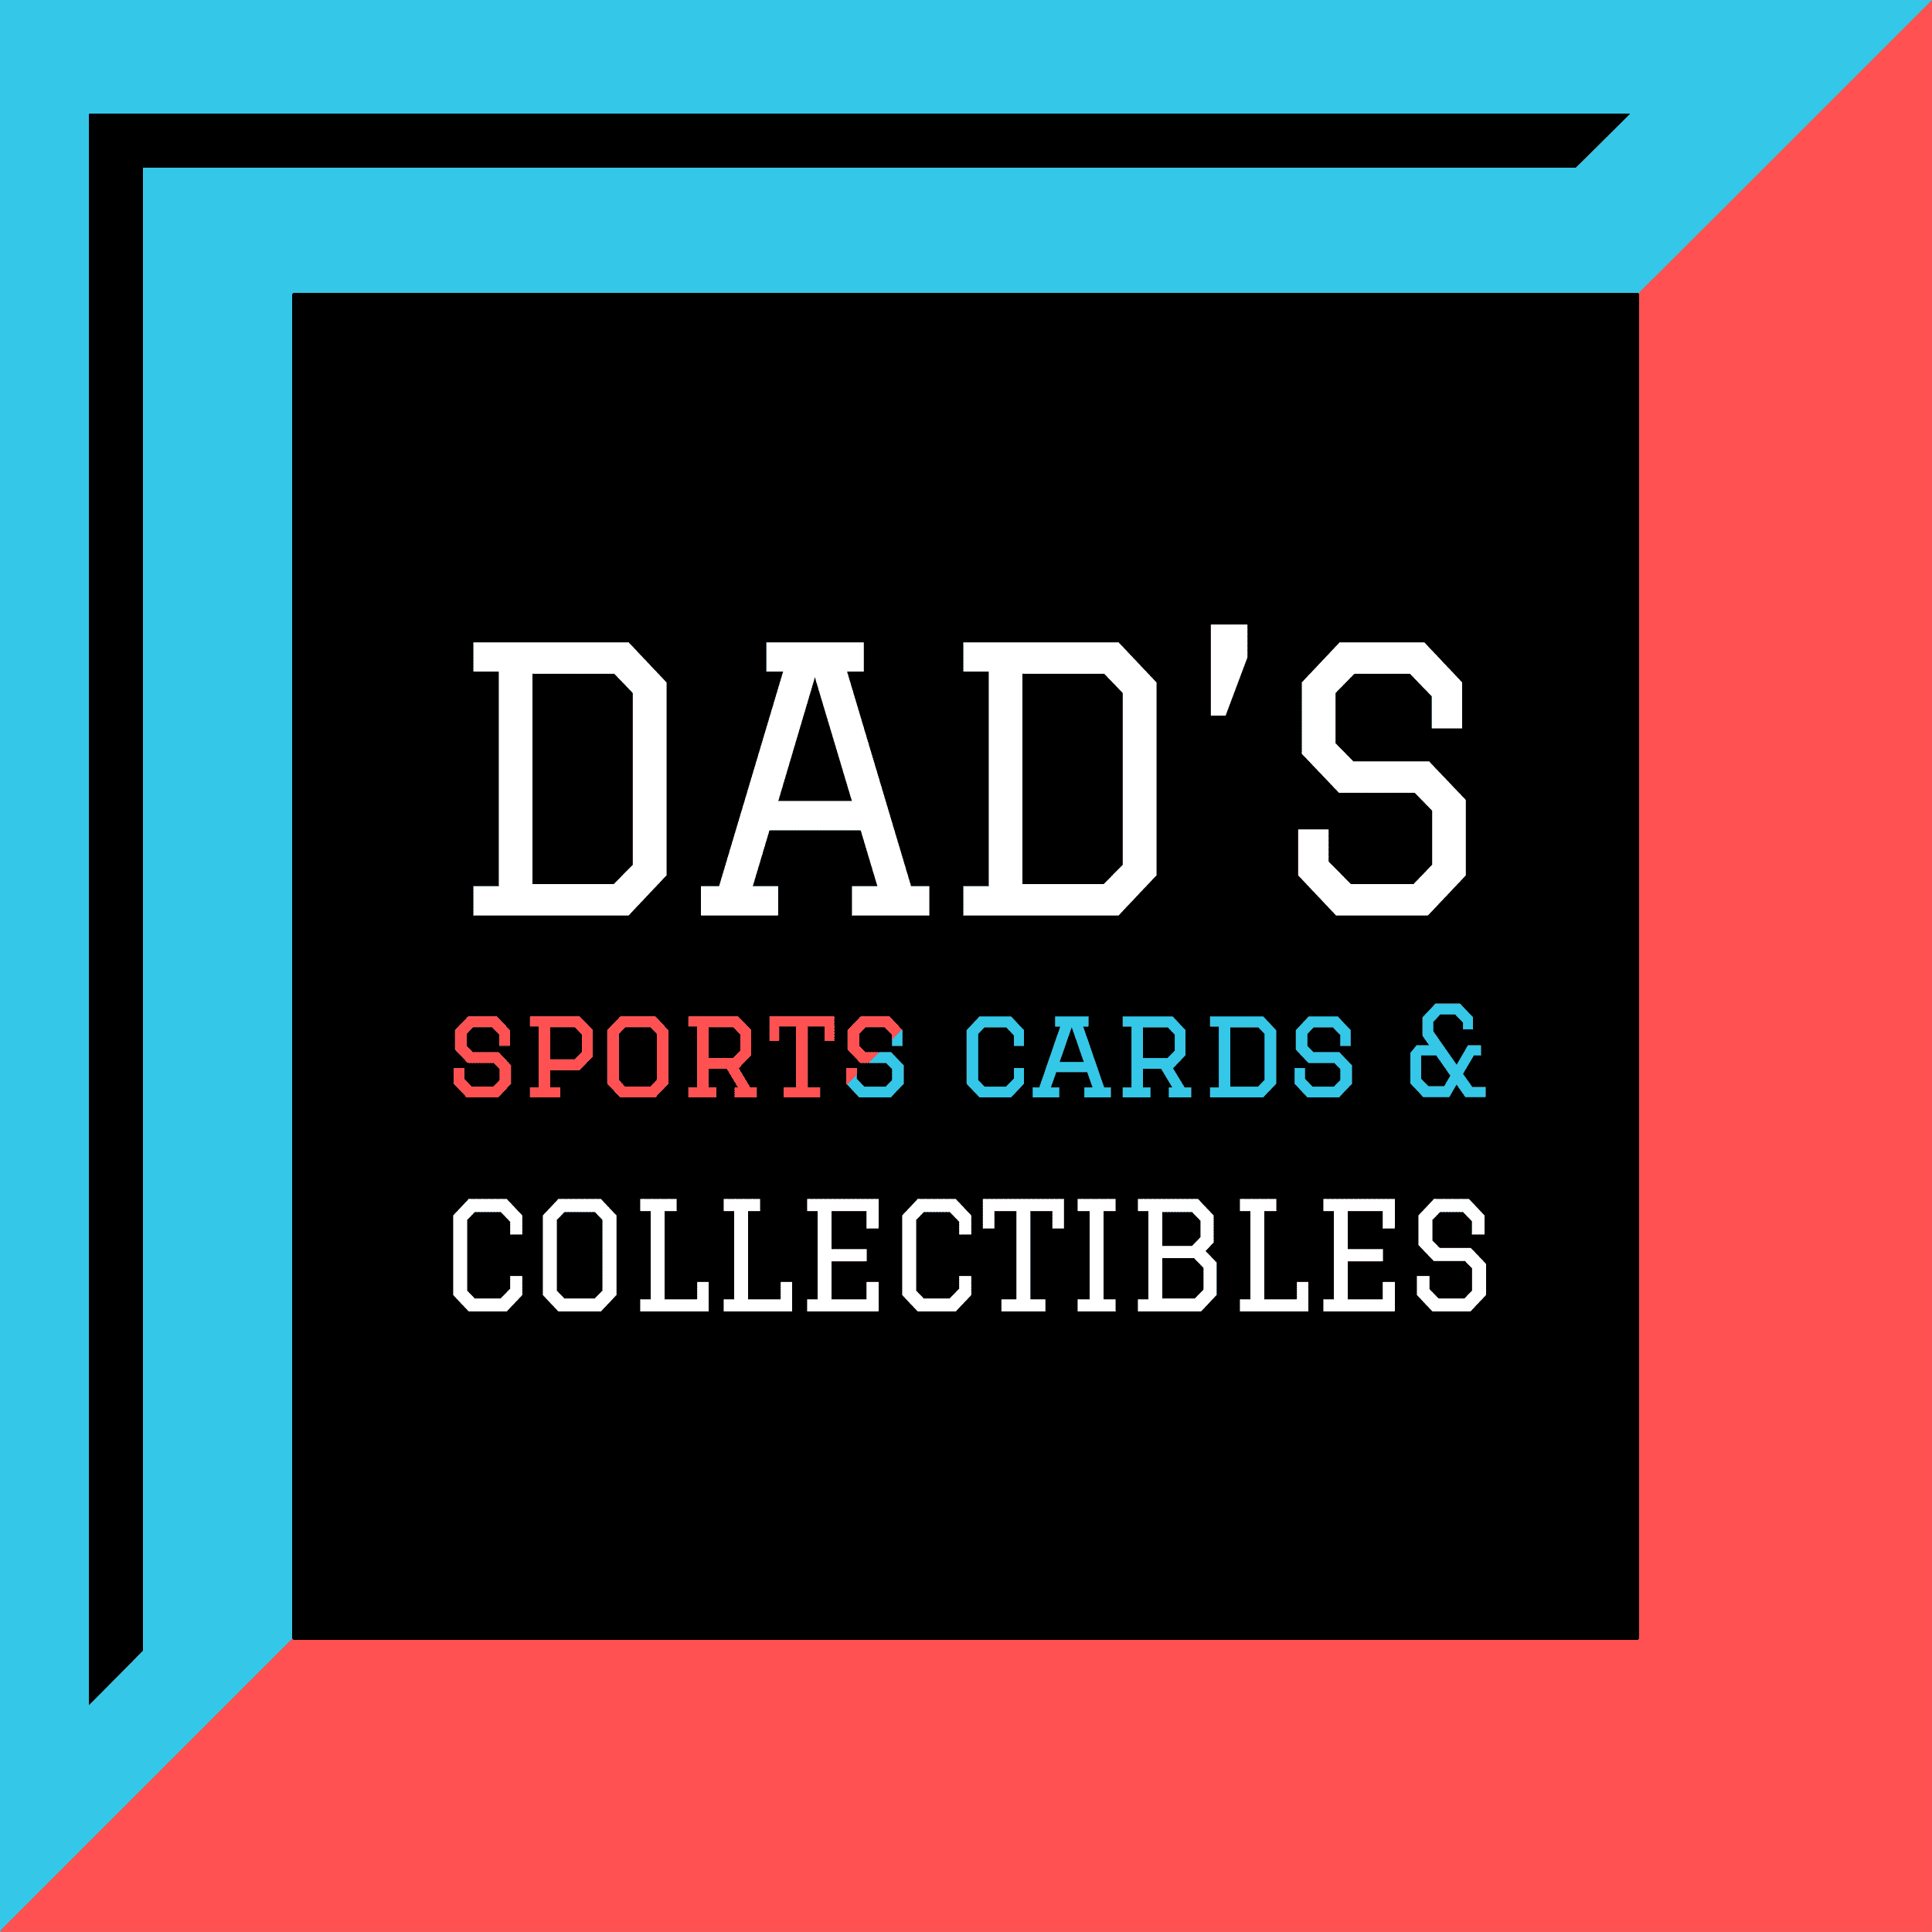 Dad's Sports Cards and Collectibles sports memorabilia and sports cards